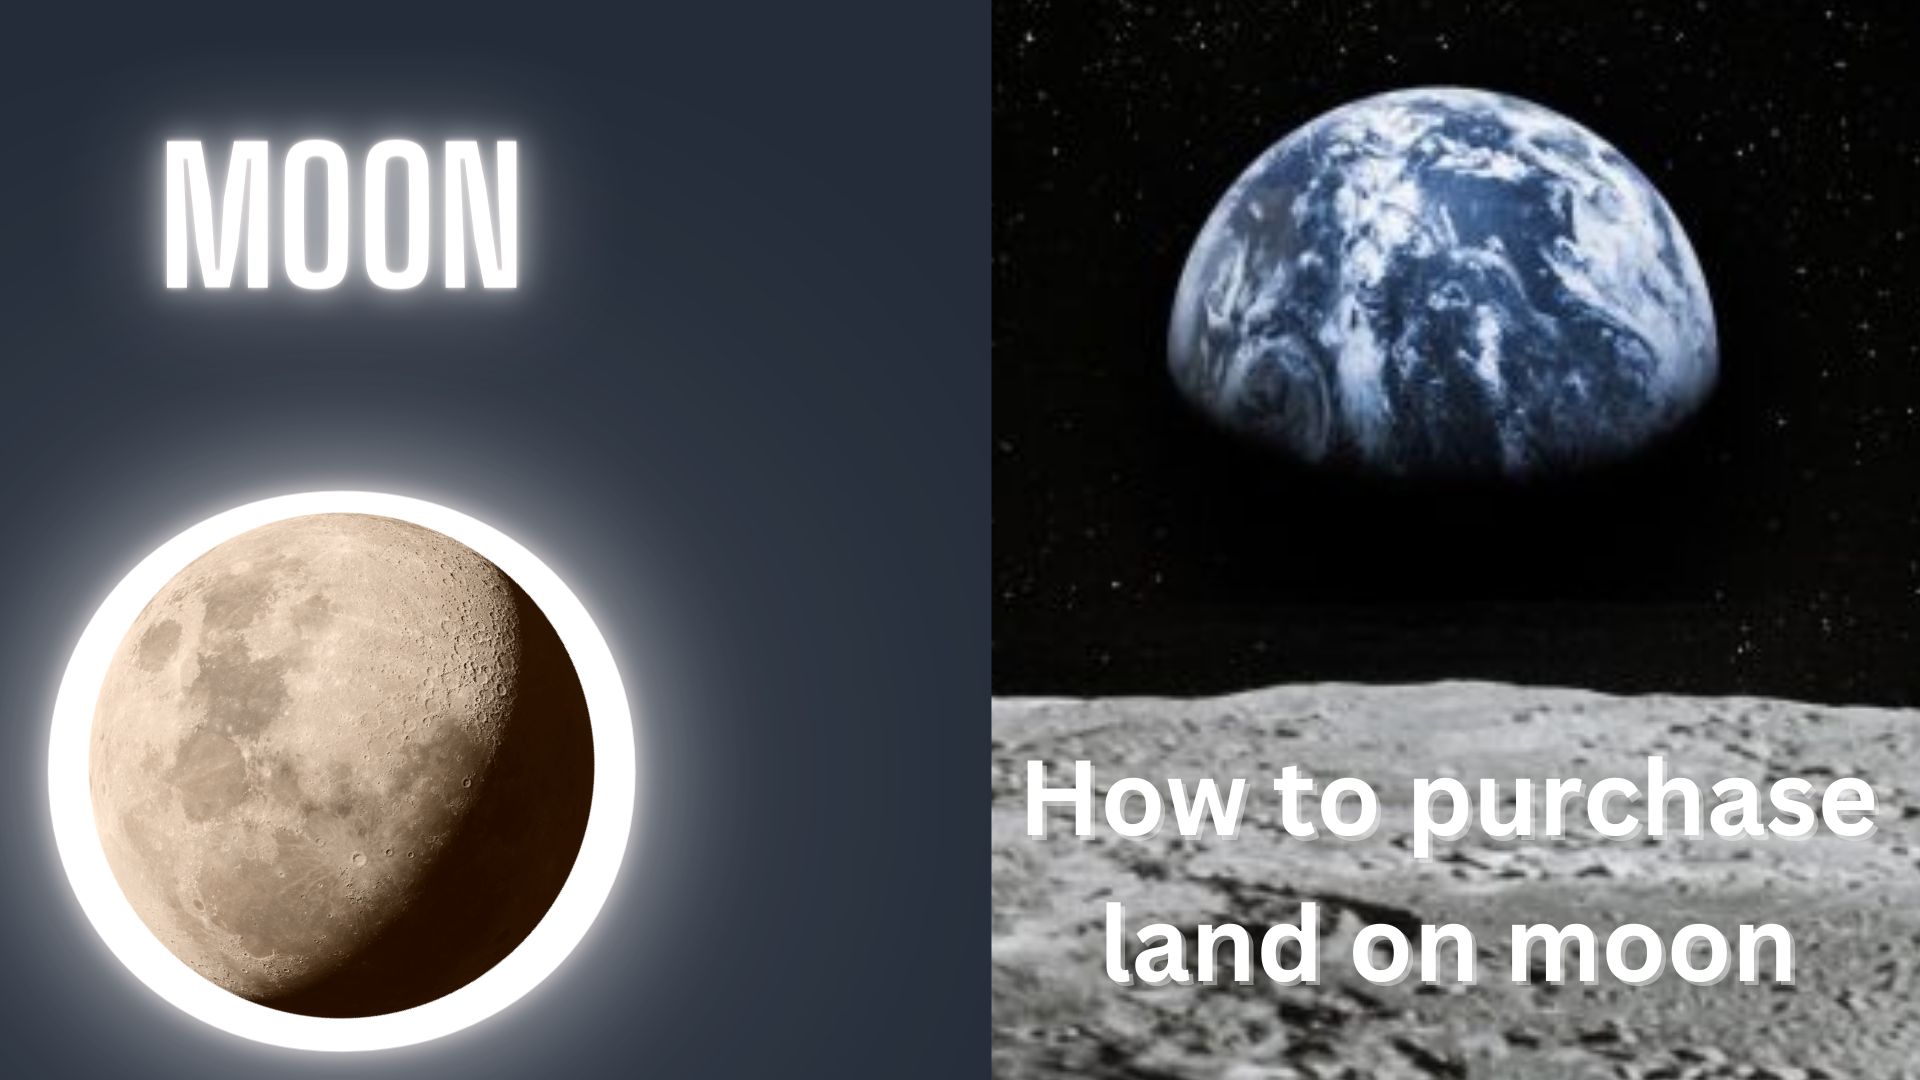 How to purchase land on moon | The Lunar Registry| Guide to Purchasing Lunar Land